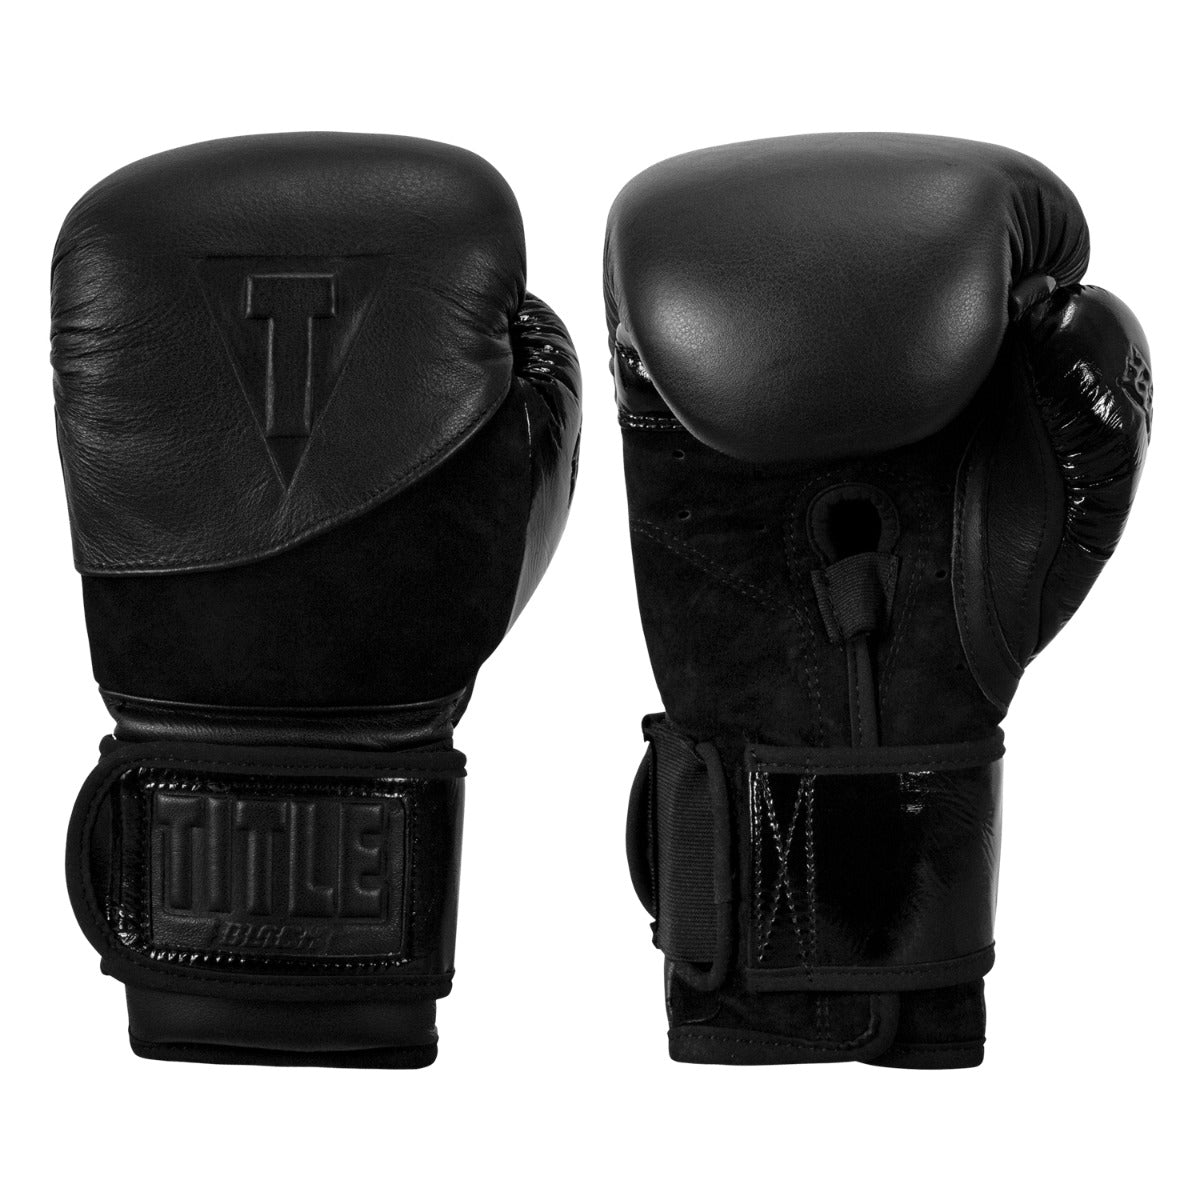 TITLE BLACK Speed Bag | TITLE Boxing Gear